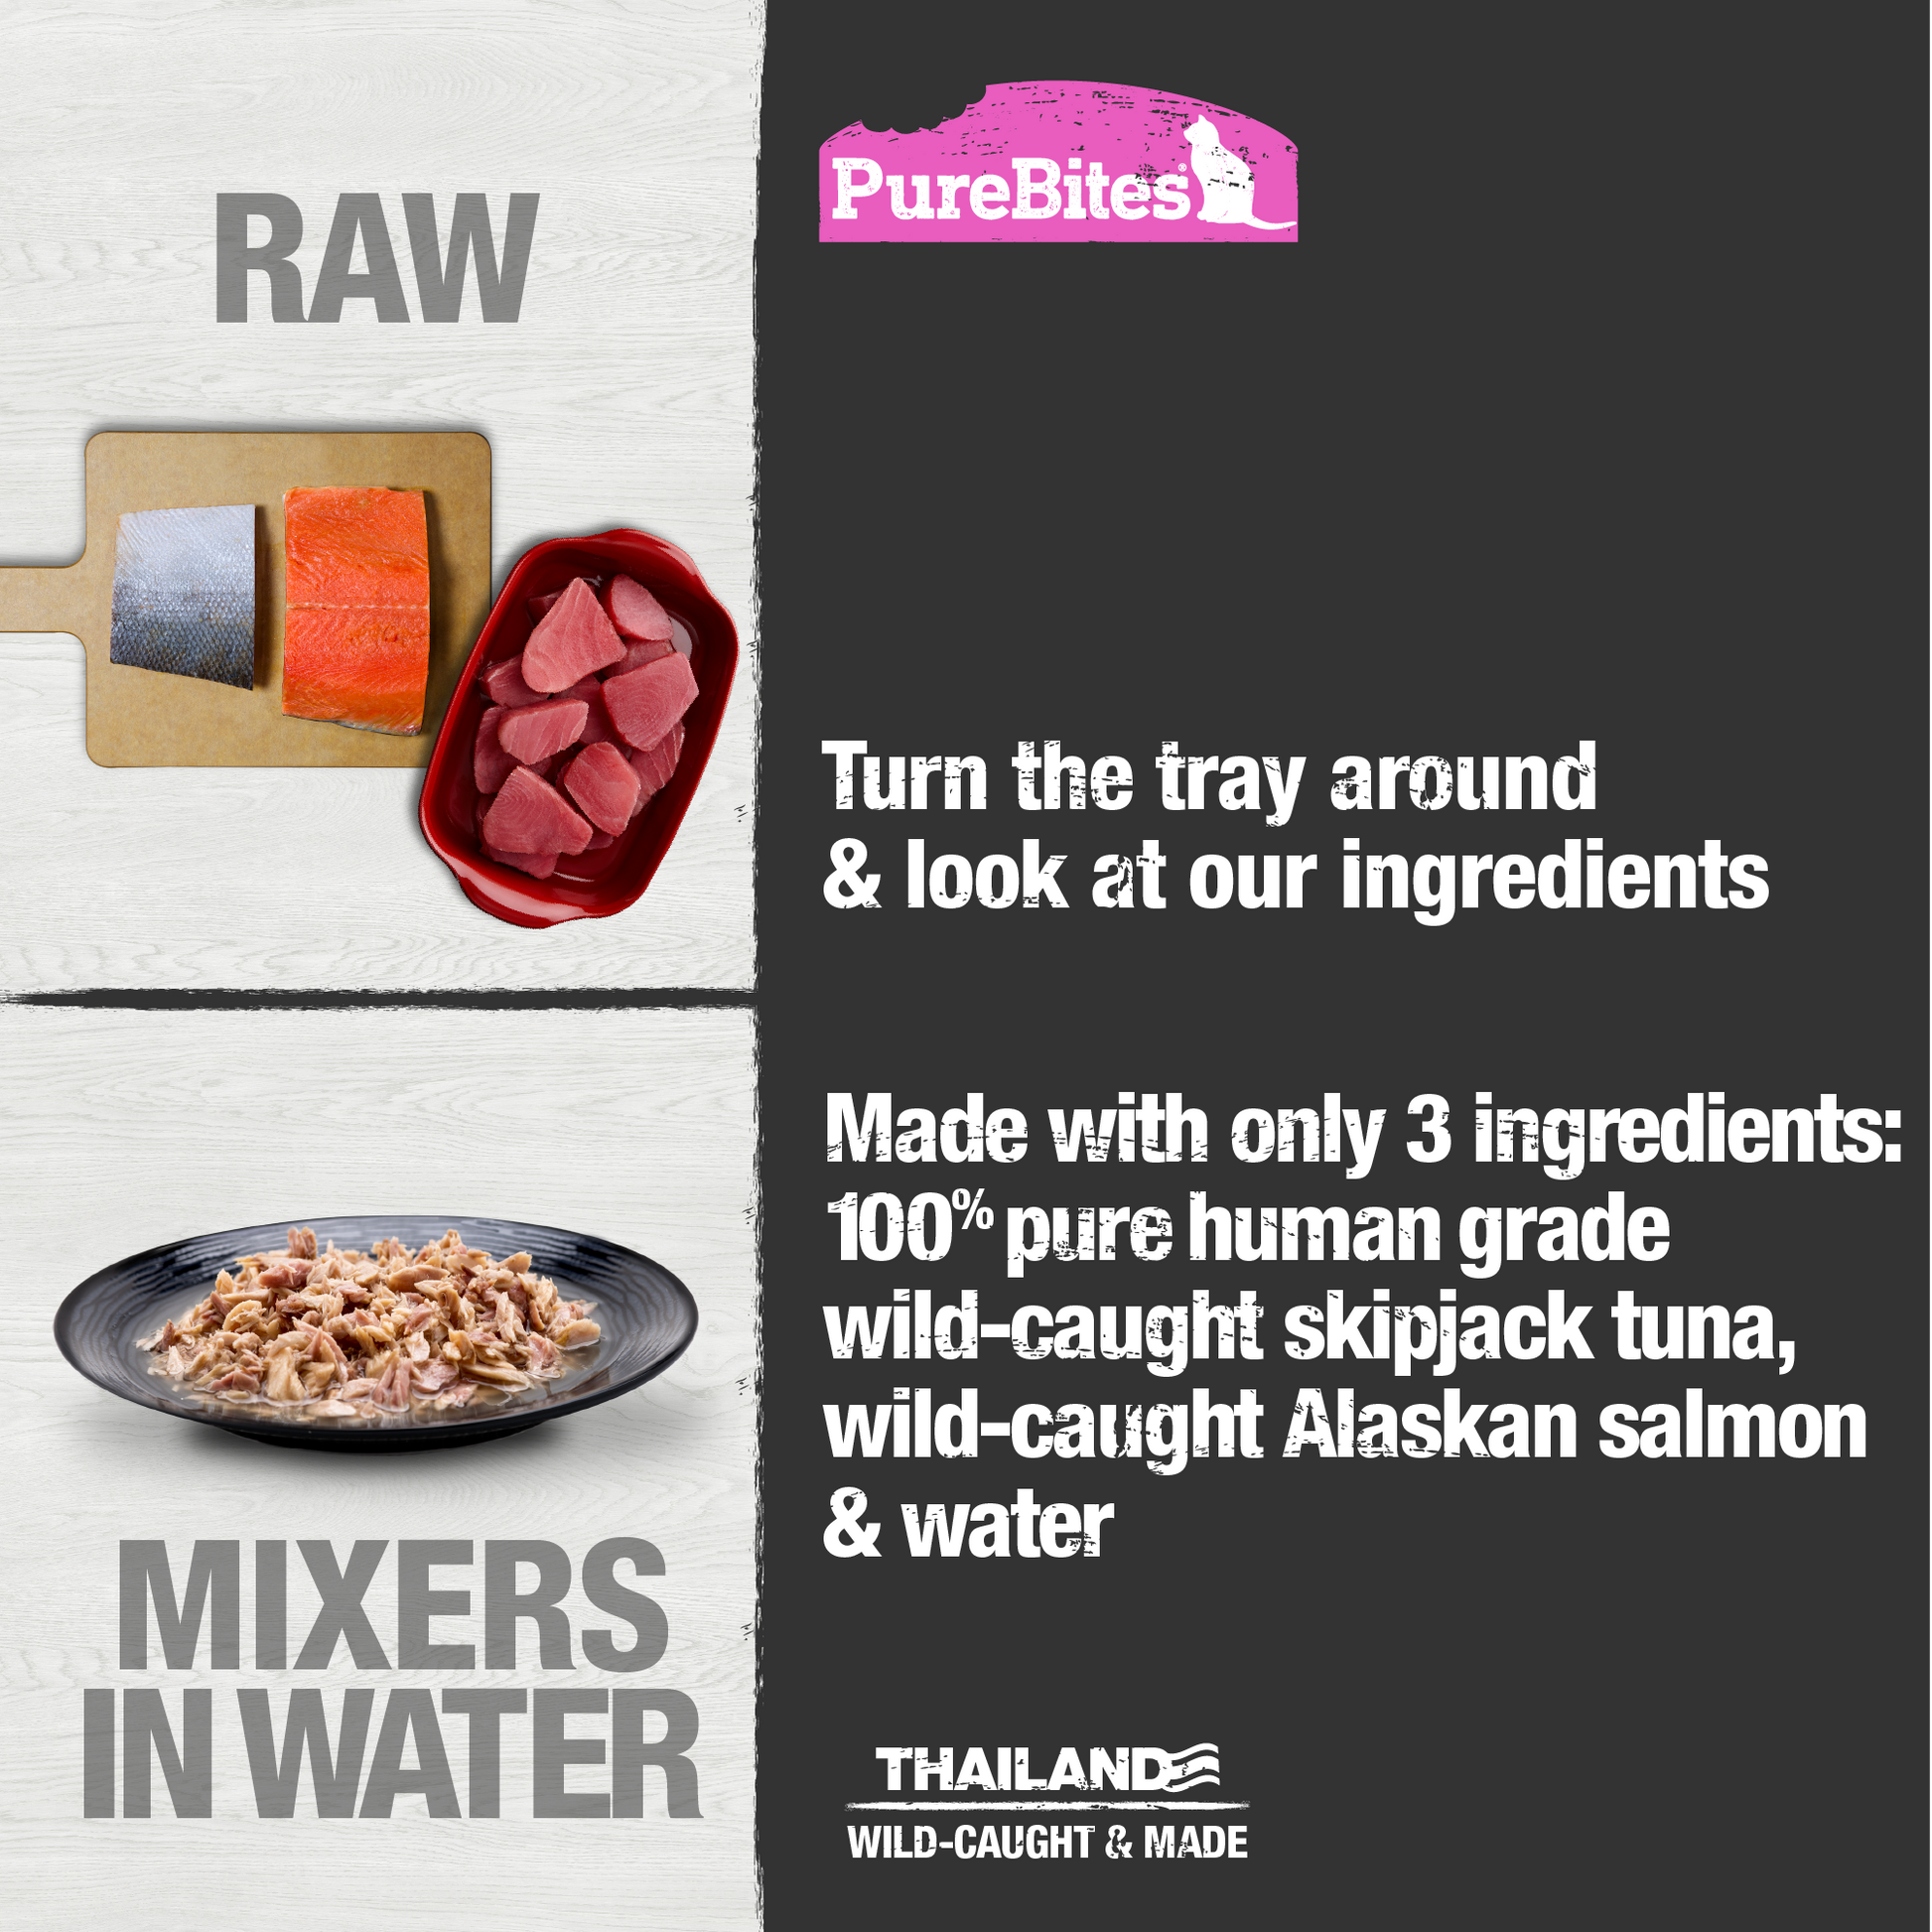 Made with only 3 Ingredients you can read, pronounce, and trust: Water, wild-caught Skipjack tuna, wild-caught Alaskan salmon